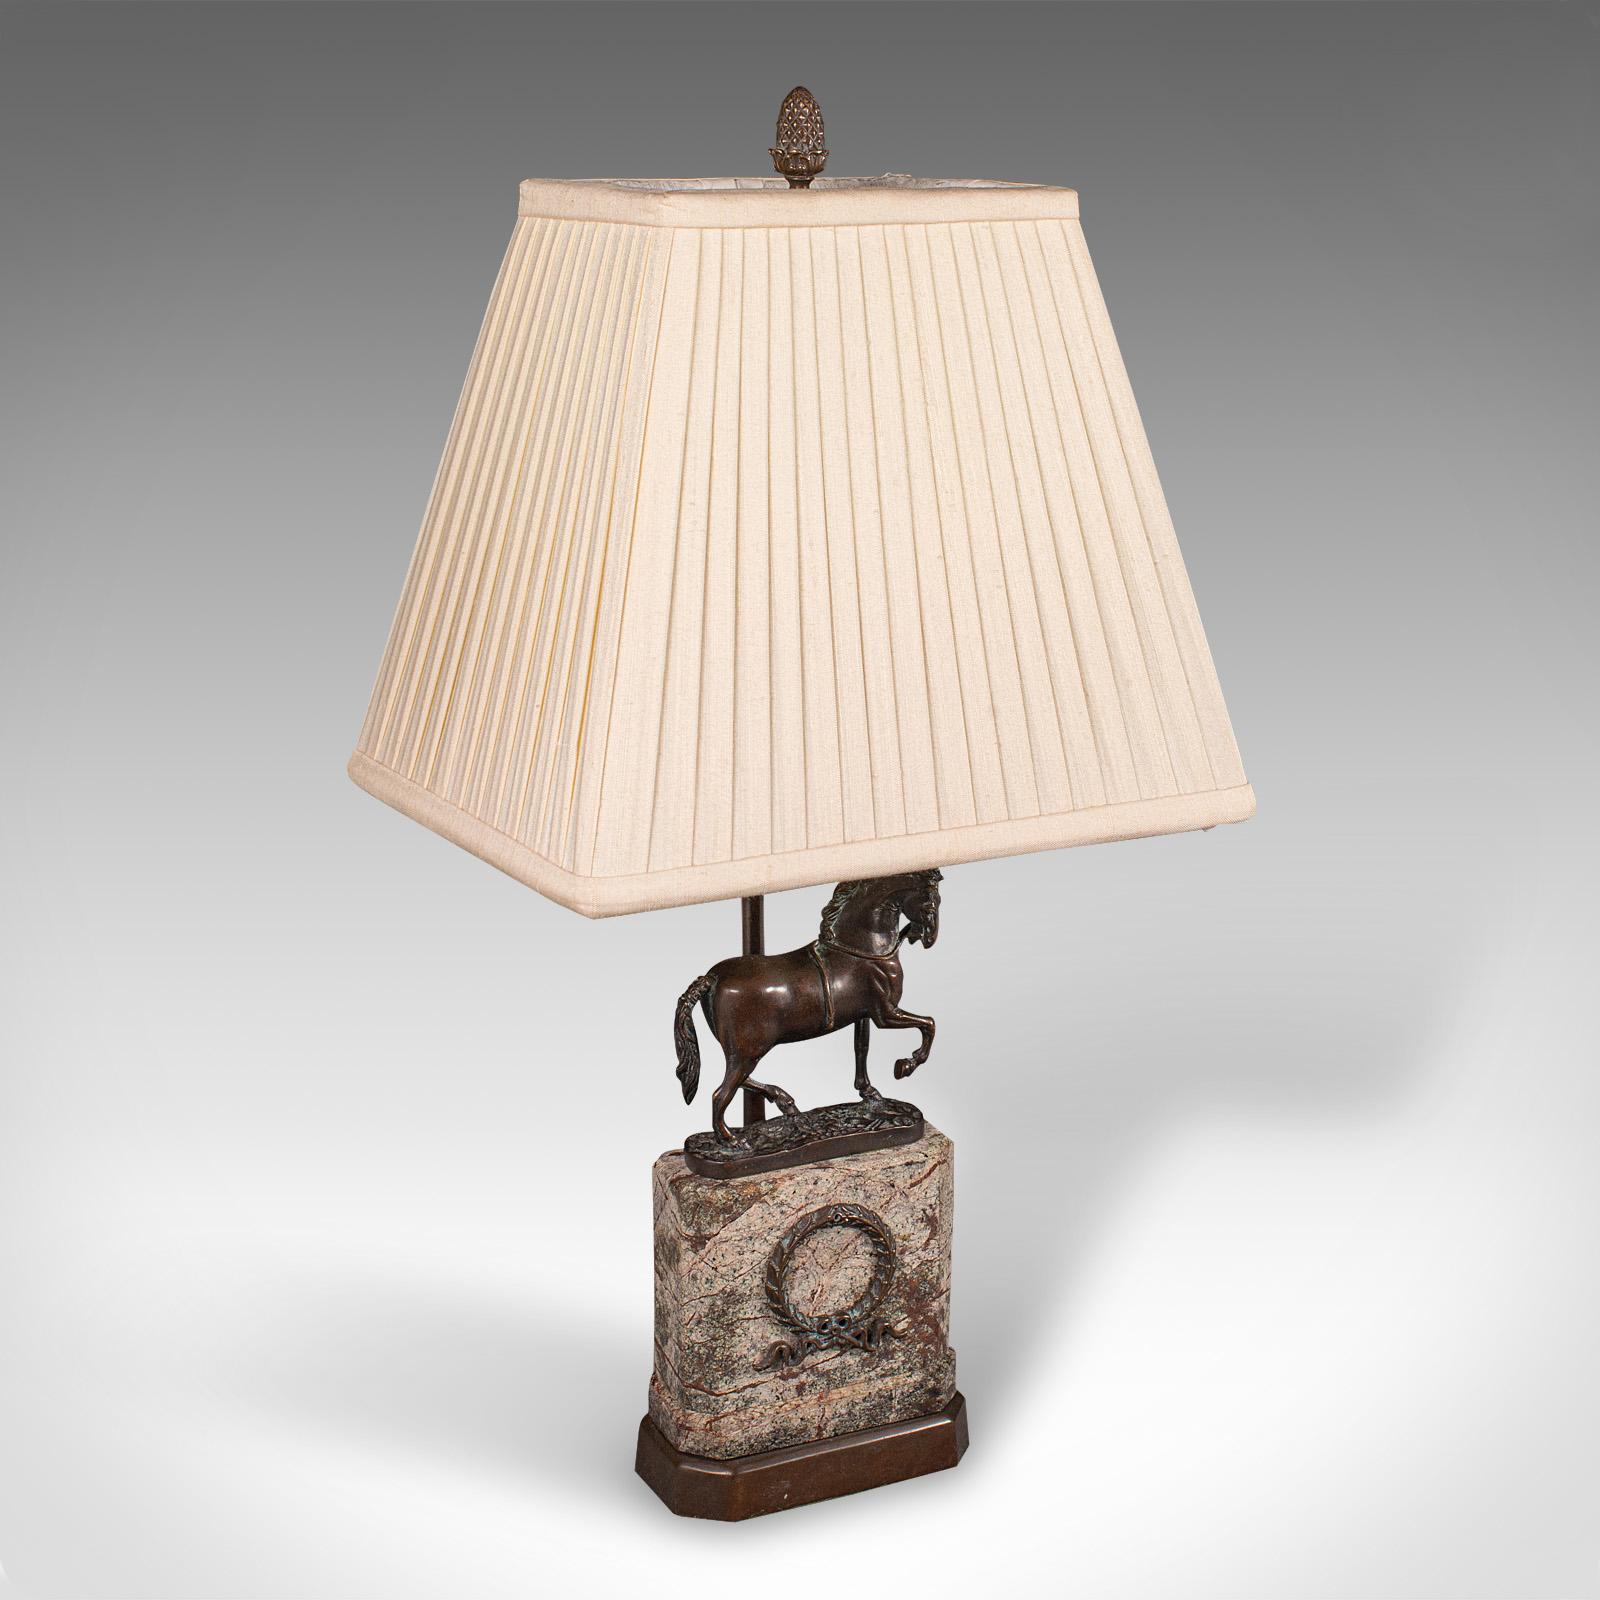 This is a vintage equine table lamp. An English, bronze and granite decorative light, dating to the late 20th century, circa 1970.

Fascinating horse figure adds equestrian charm to this lamp
Displays a desirable aged patina and in good order